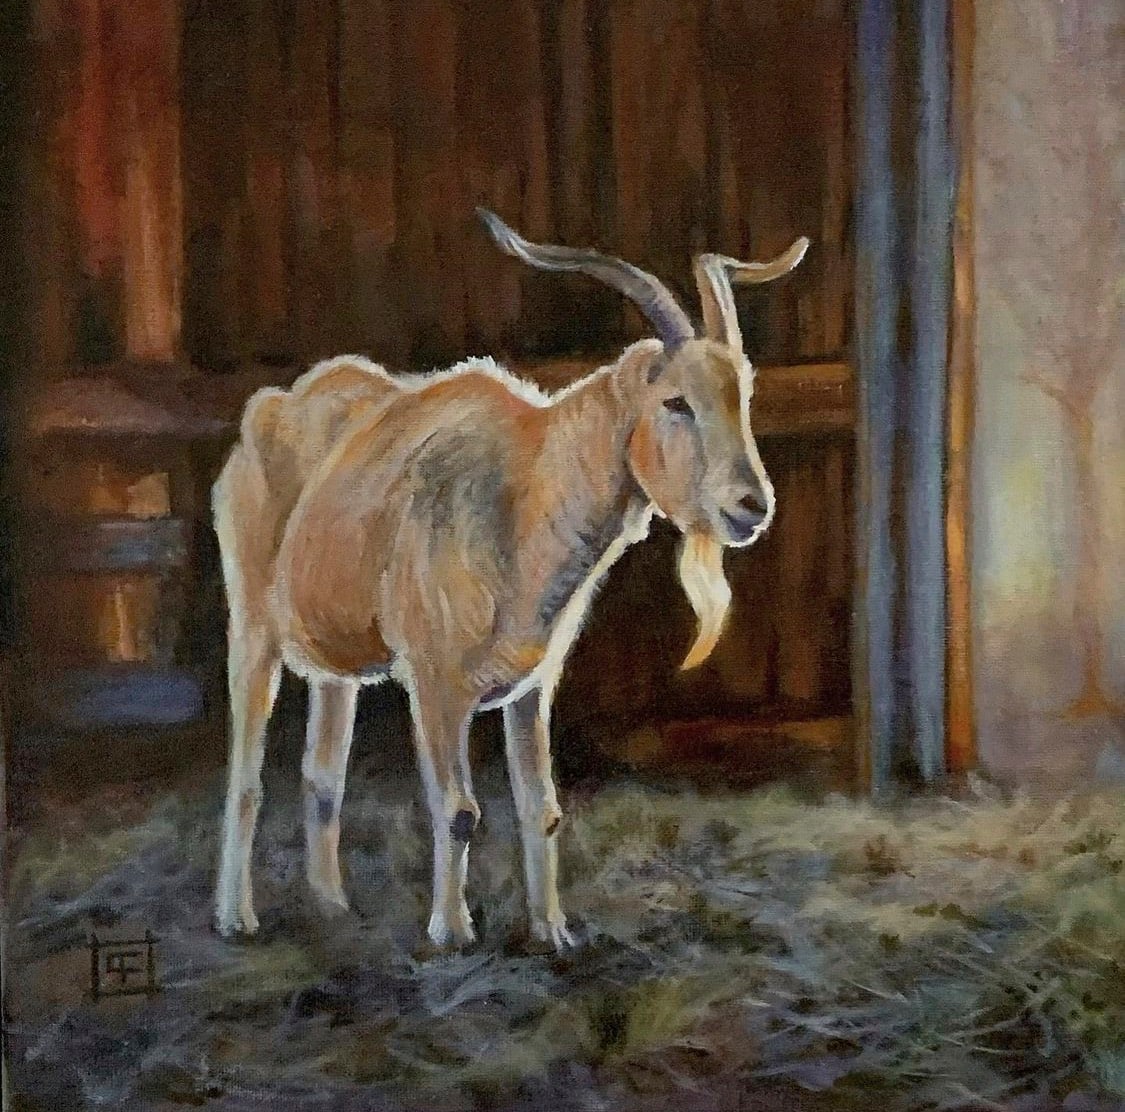 A Good Morning - Willy the Goat by Cheryl Feng  Image: A Good Morning - Willy the Goat by Cheryl Feng